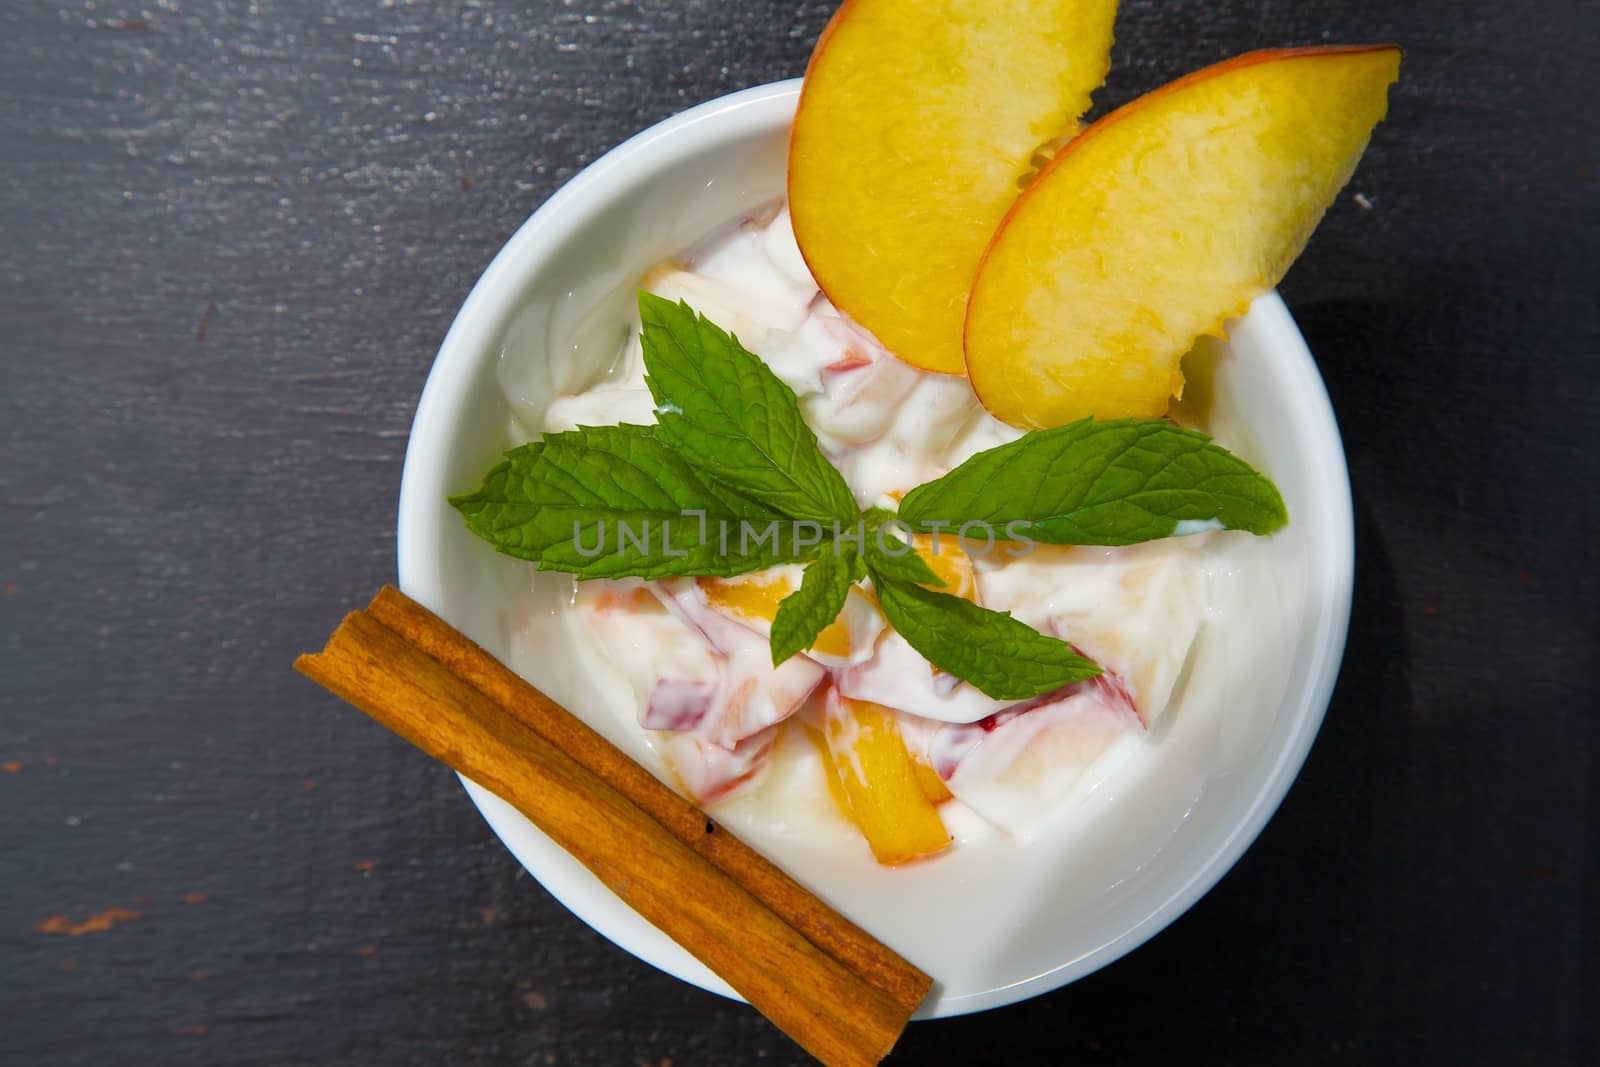 Homemade peach yogurt in a white dish on the black wooden surface. Decorated with two slices of fresh peach and fresh peppermint leaves and cinnamon stick. Top view. 